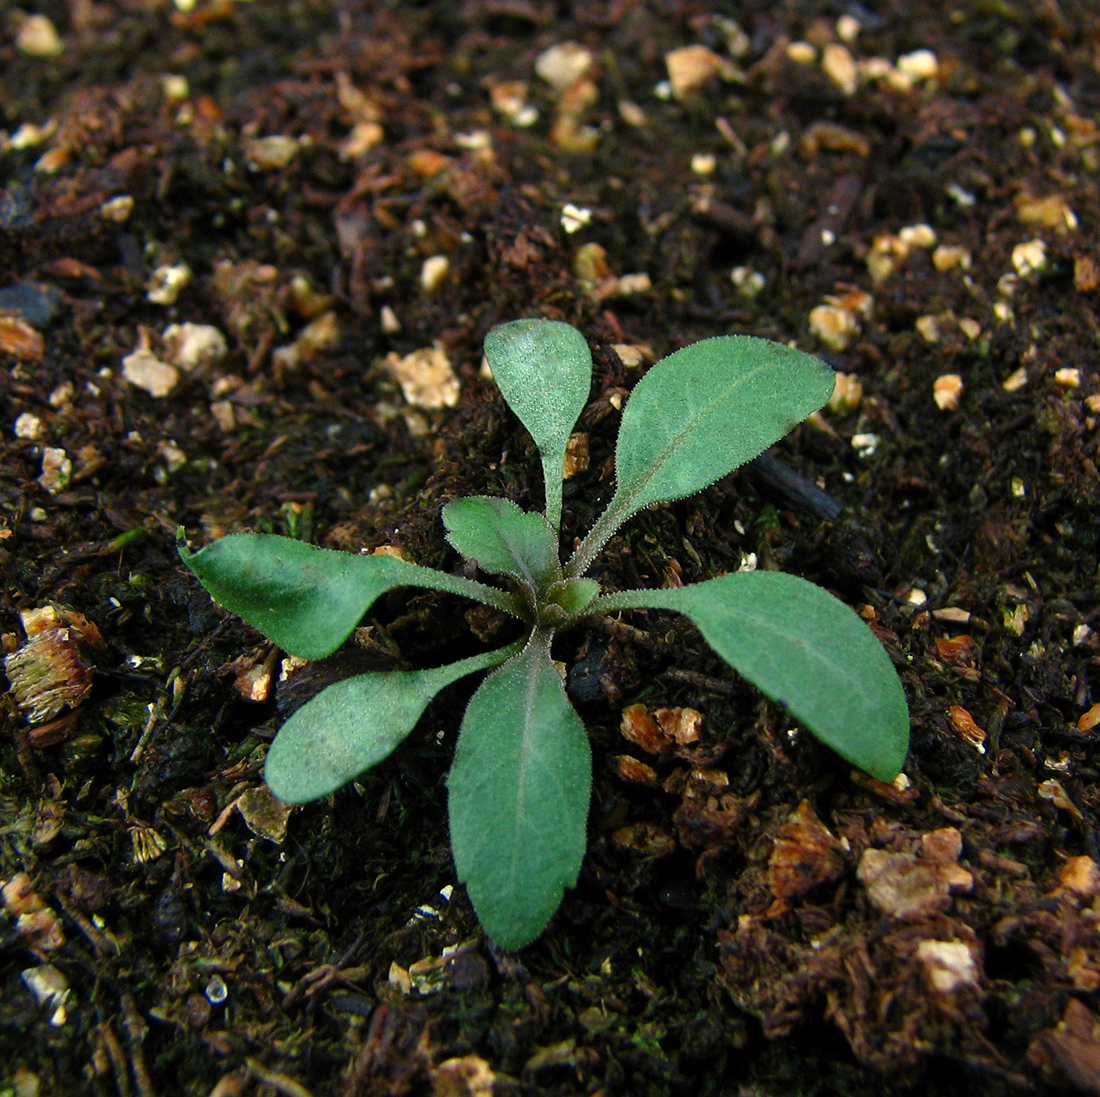 The basal rosette with oval leaves having a rounded apex